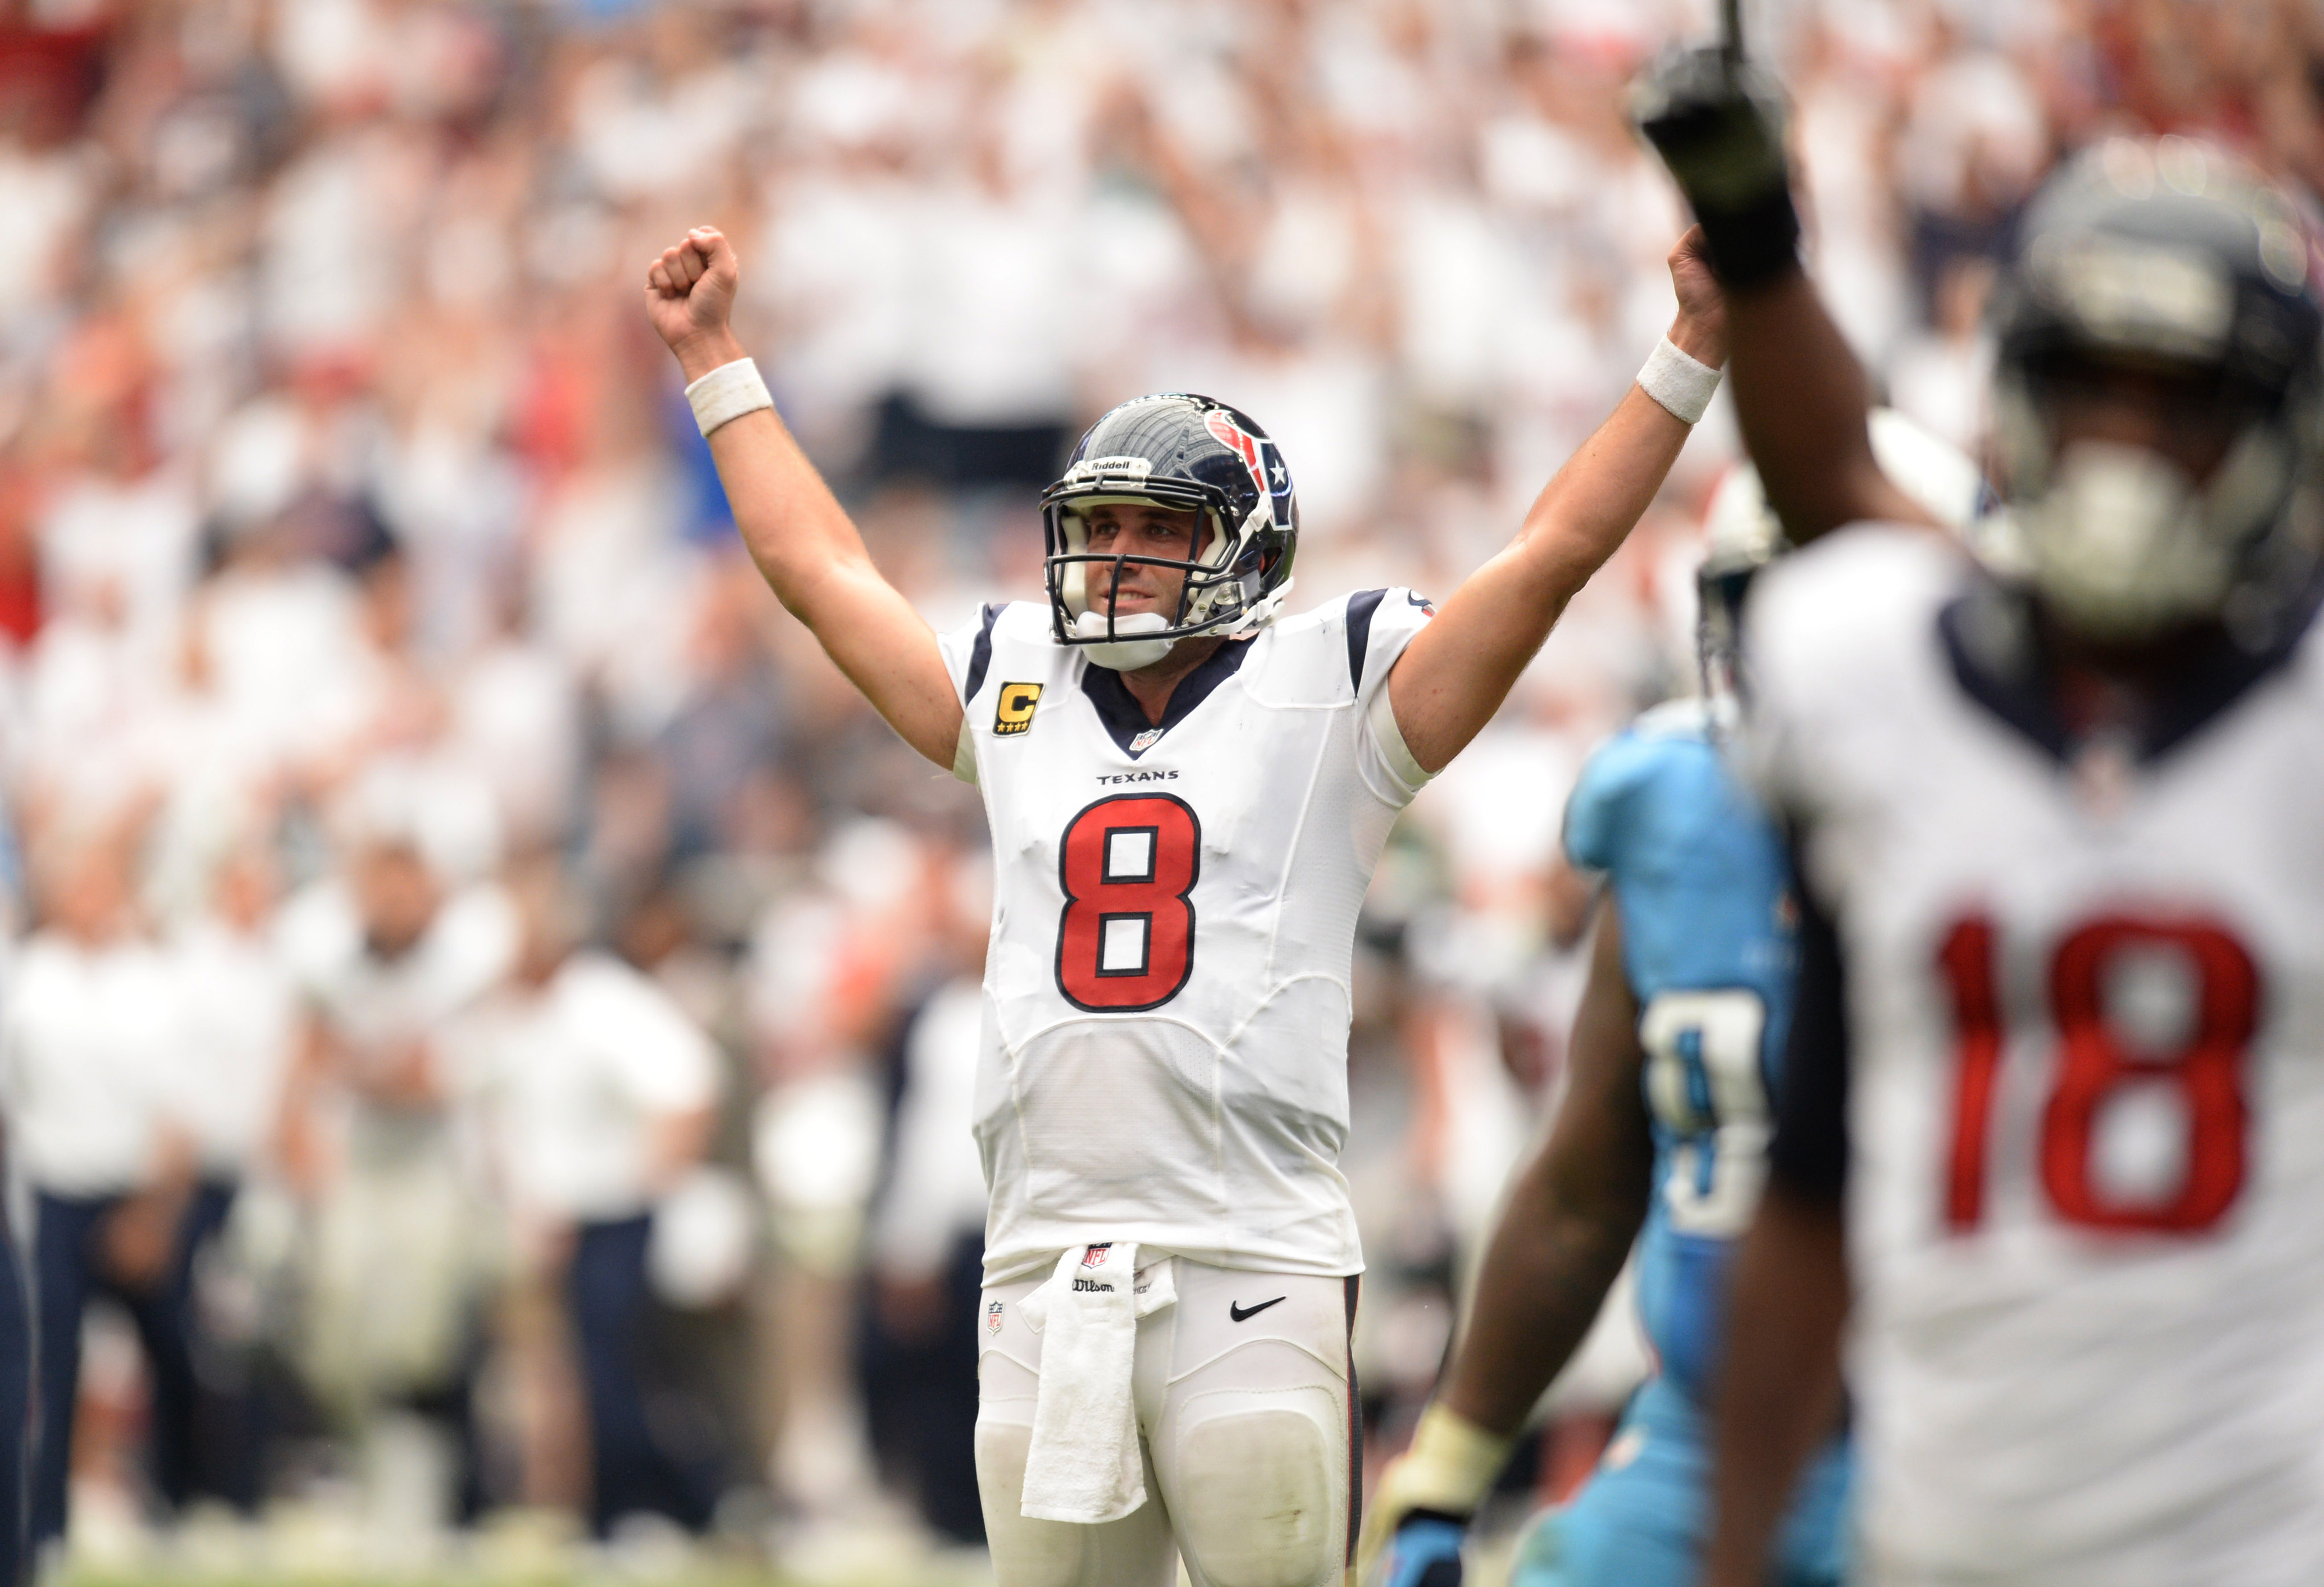 Matt Schaub, it's your someone named "Redemption" on Line One.  Will you take the call?